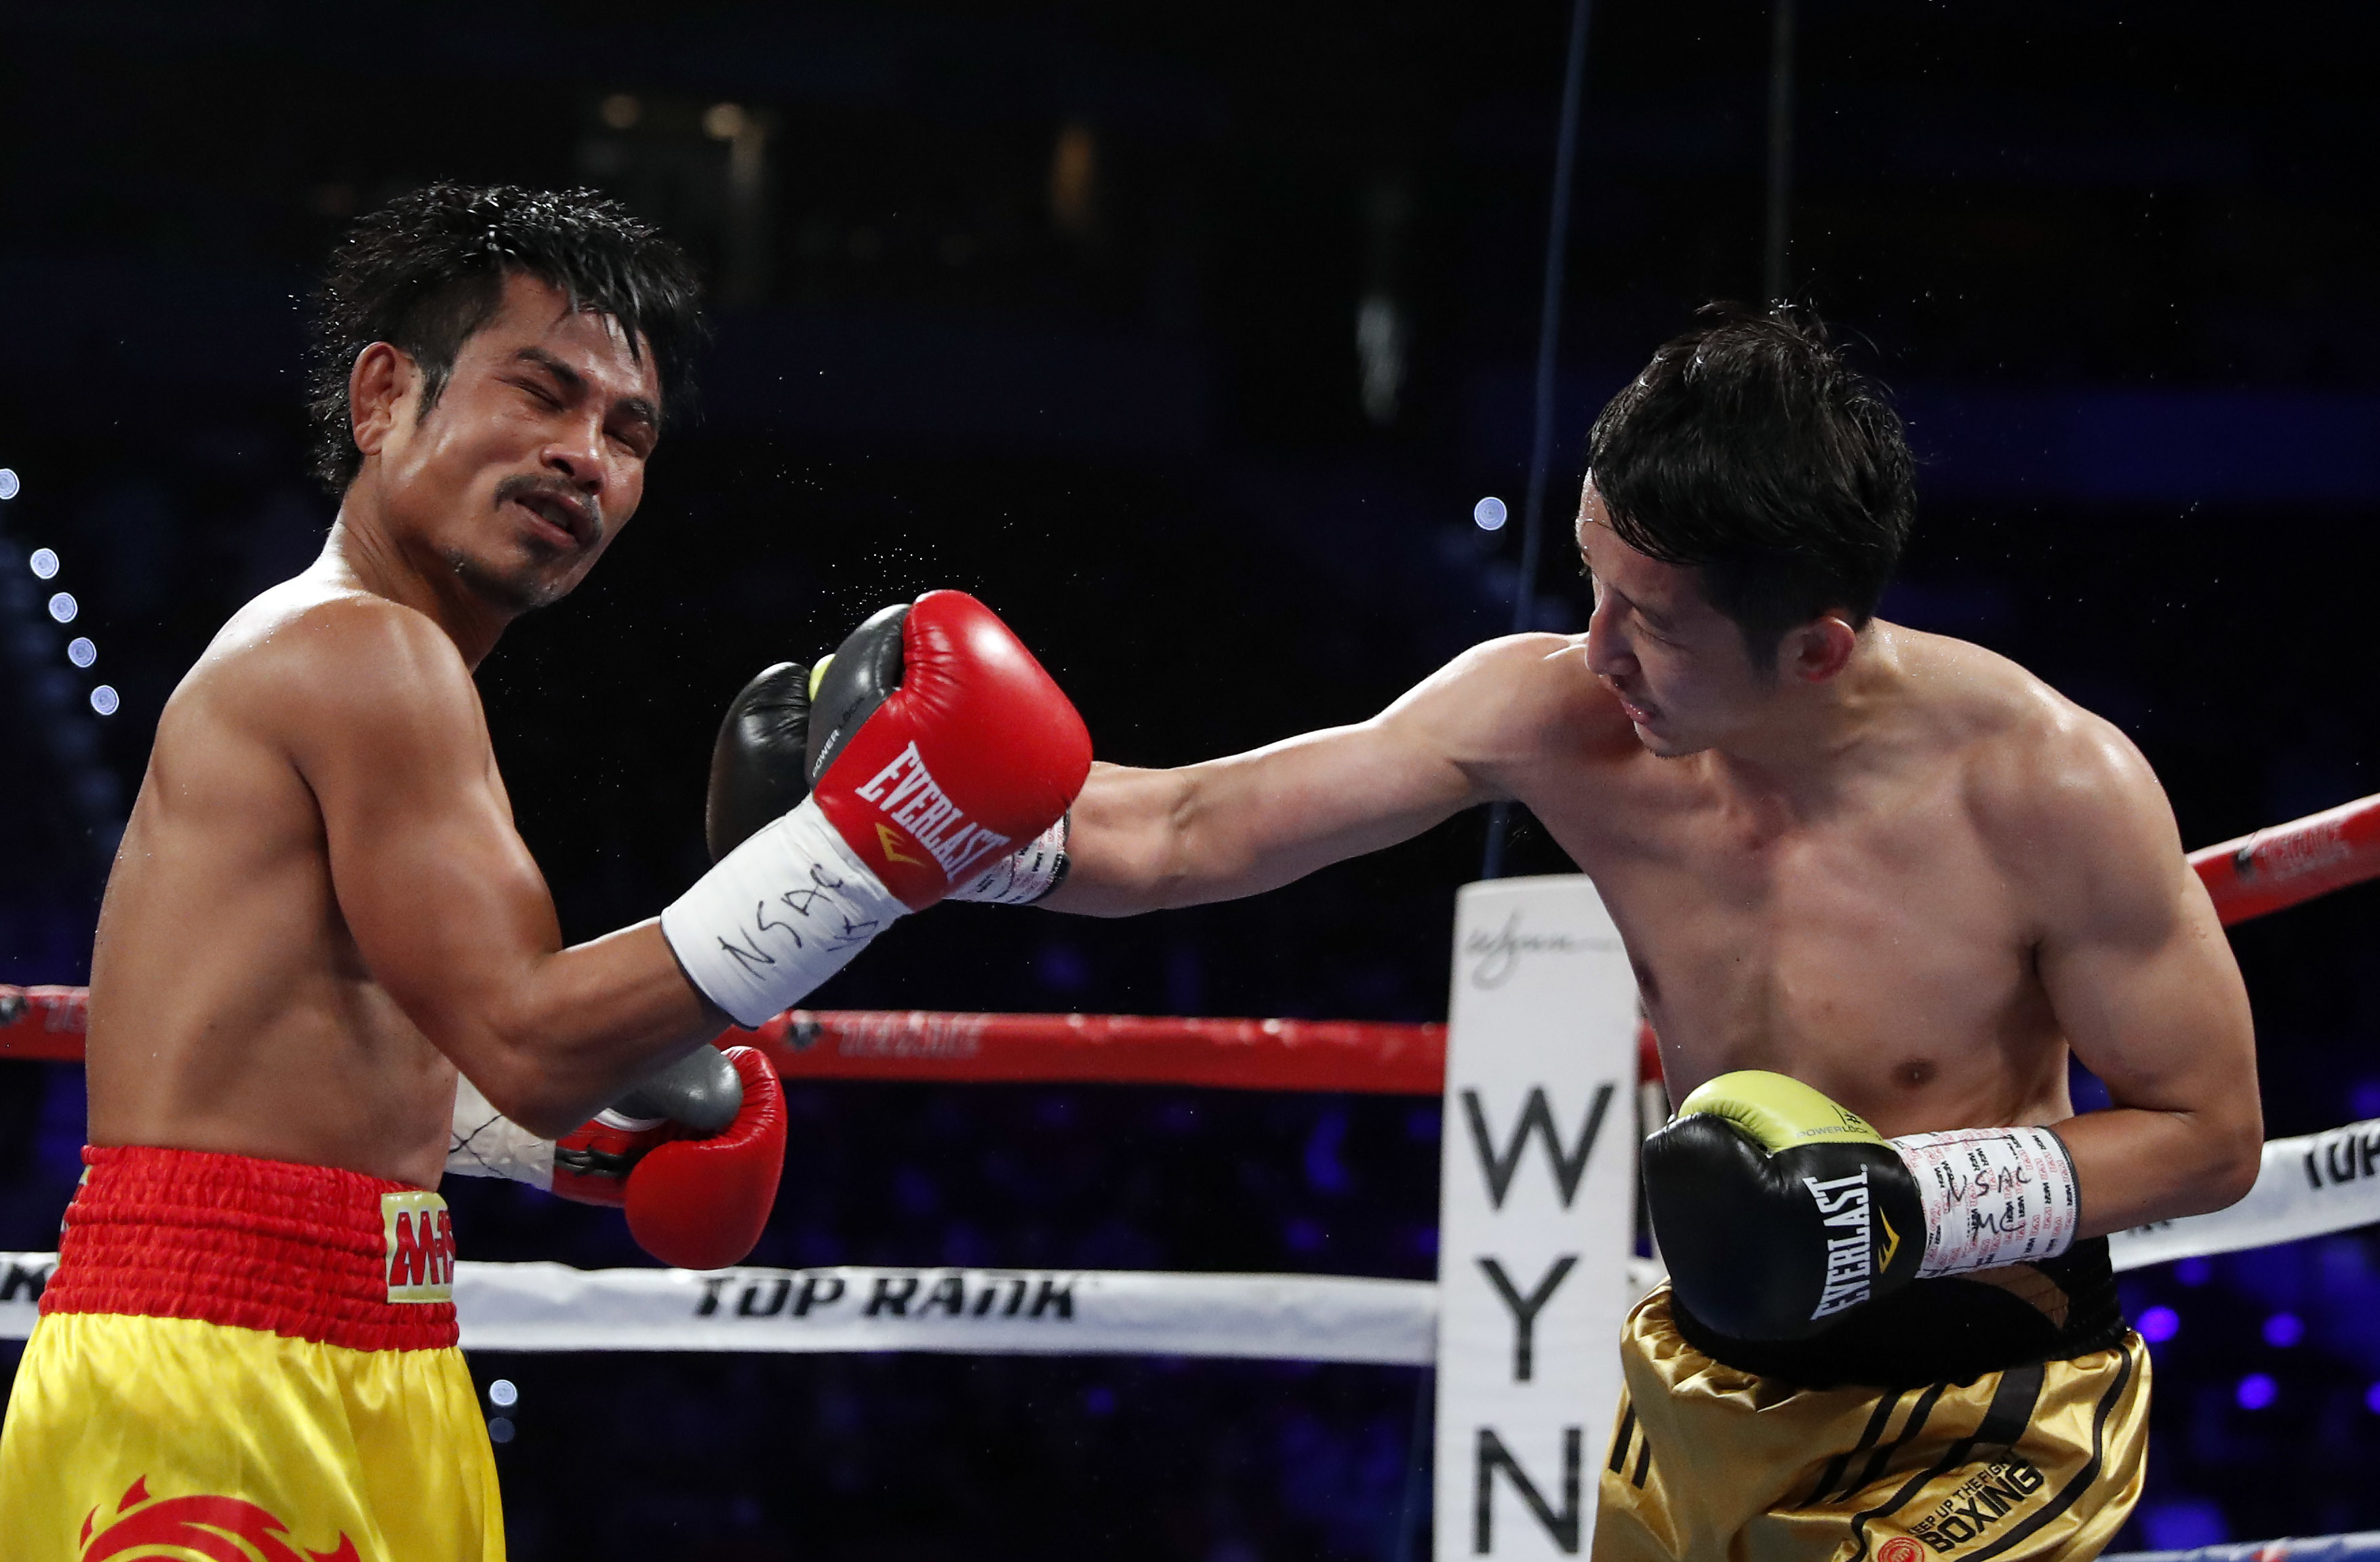 Zou Shiming, right, of China, punches Prasitak Phaprom, of Thailand, during their WBO flyweight title boxing match on Saturday, Nov. 5, 2016, in Las Vegas. Zou won by unanimous decision. (AP Photo/Isaac Brekken)